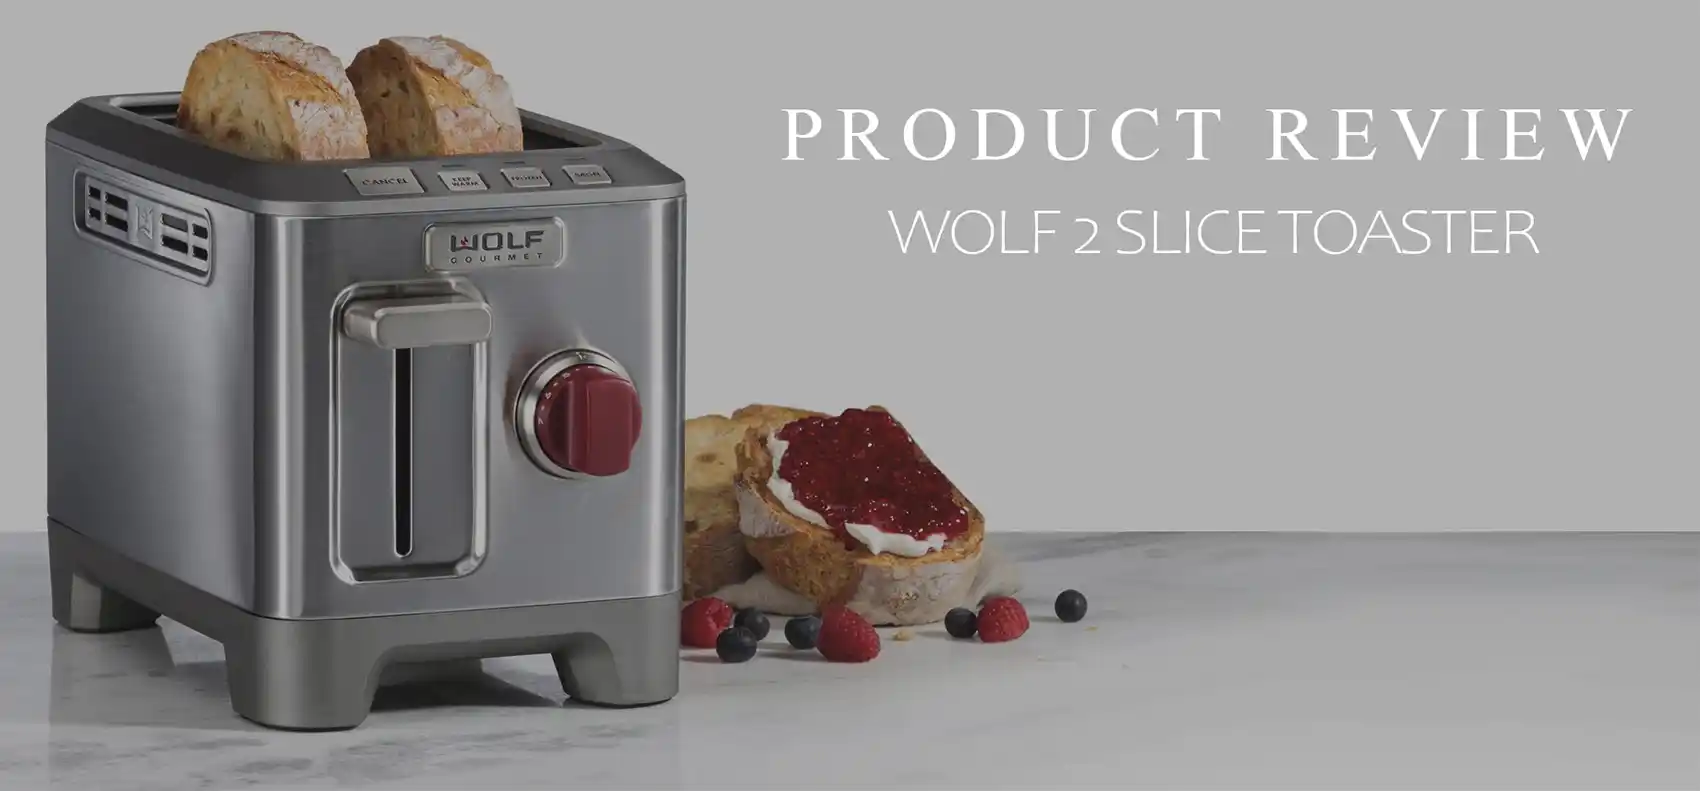 wolf-2-slice-toaster-review-banner